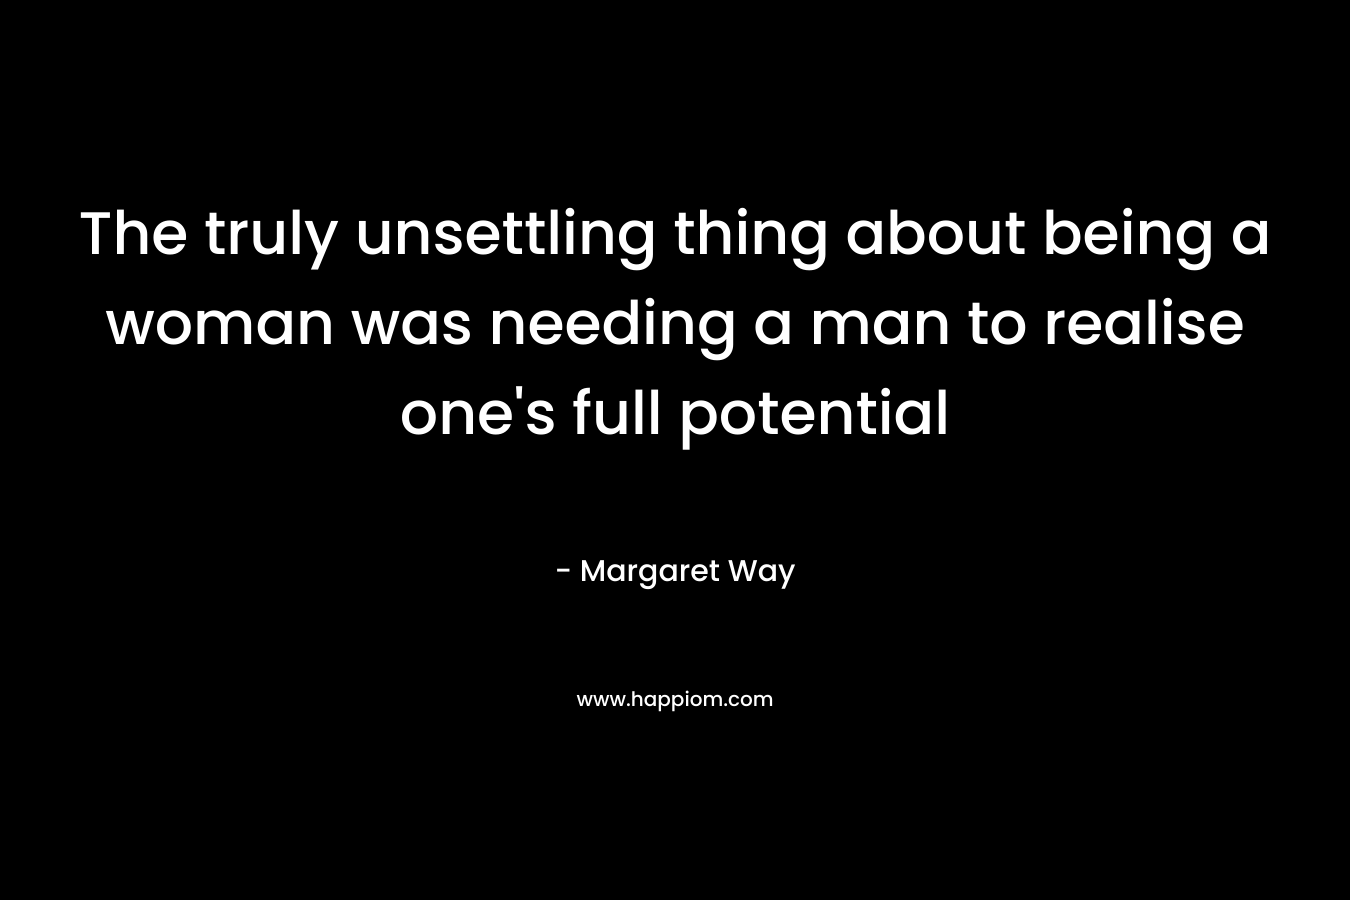 The truly unsettling thing about being a woman was needing a man to realise one’s full potential – Margaret Way